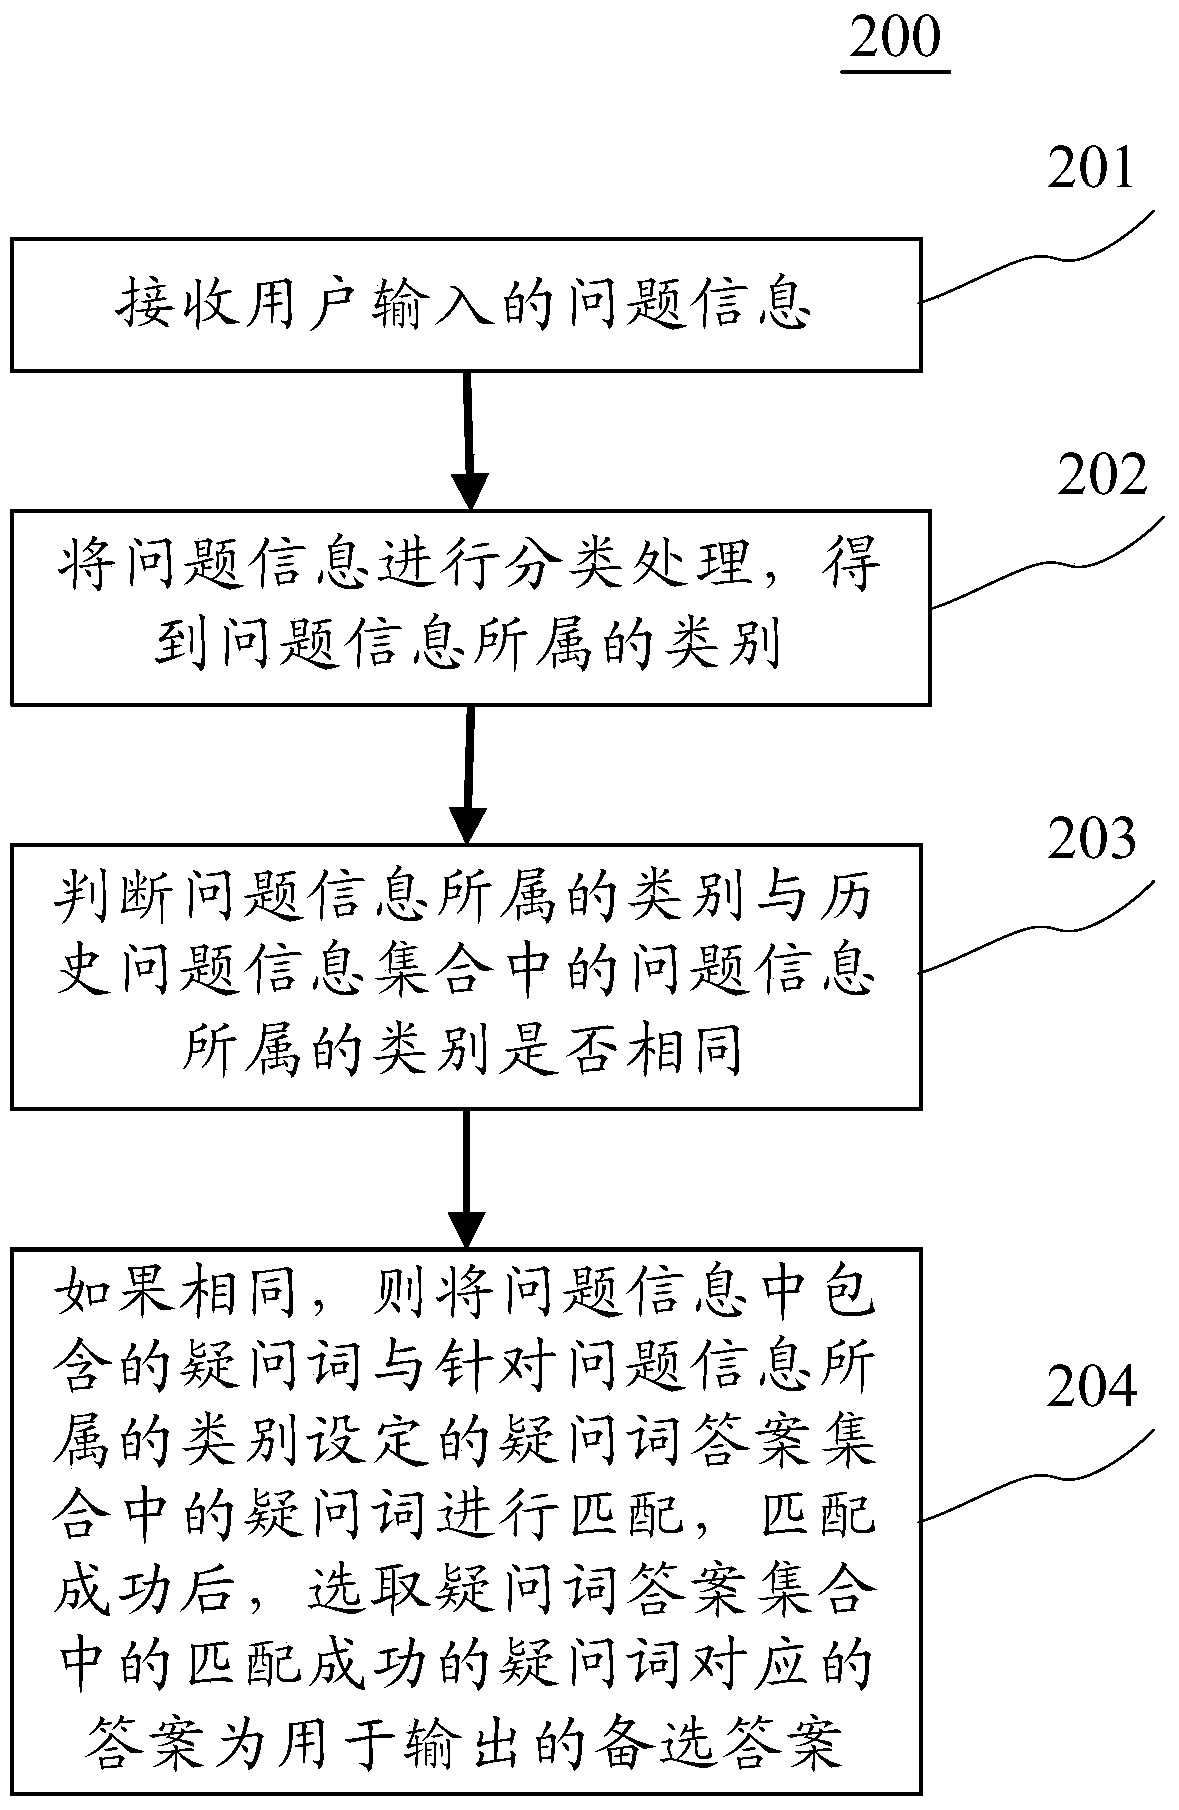 Automatic question answering method and device